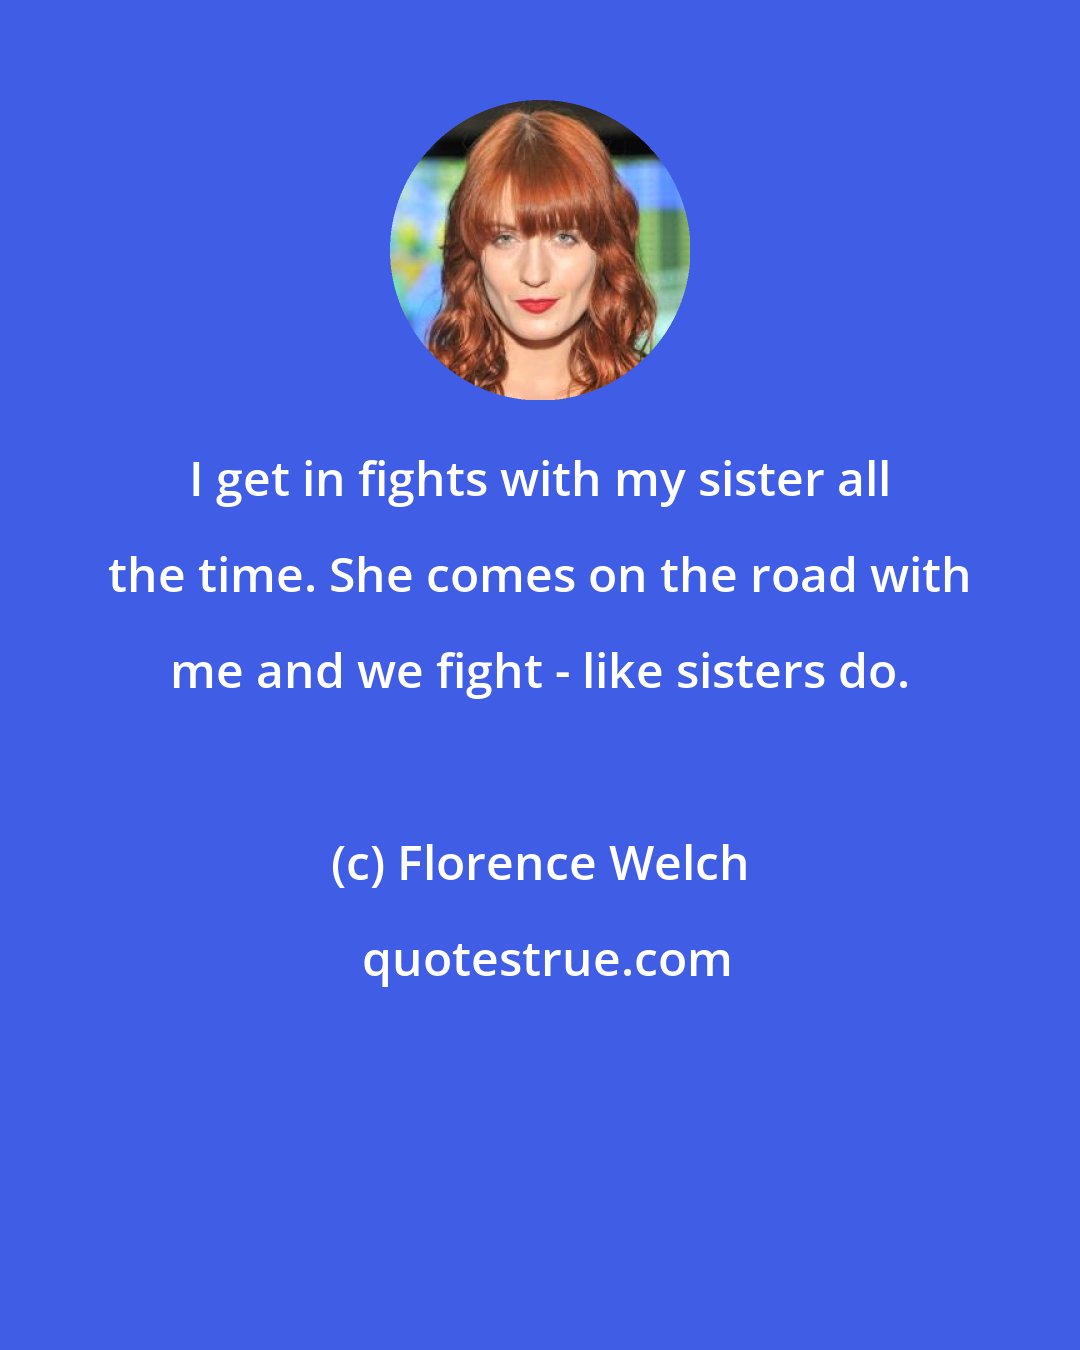 Florence Welch: I get in fights with my sister all the time. She comes on the road with me and we fight - like sisters do.